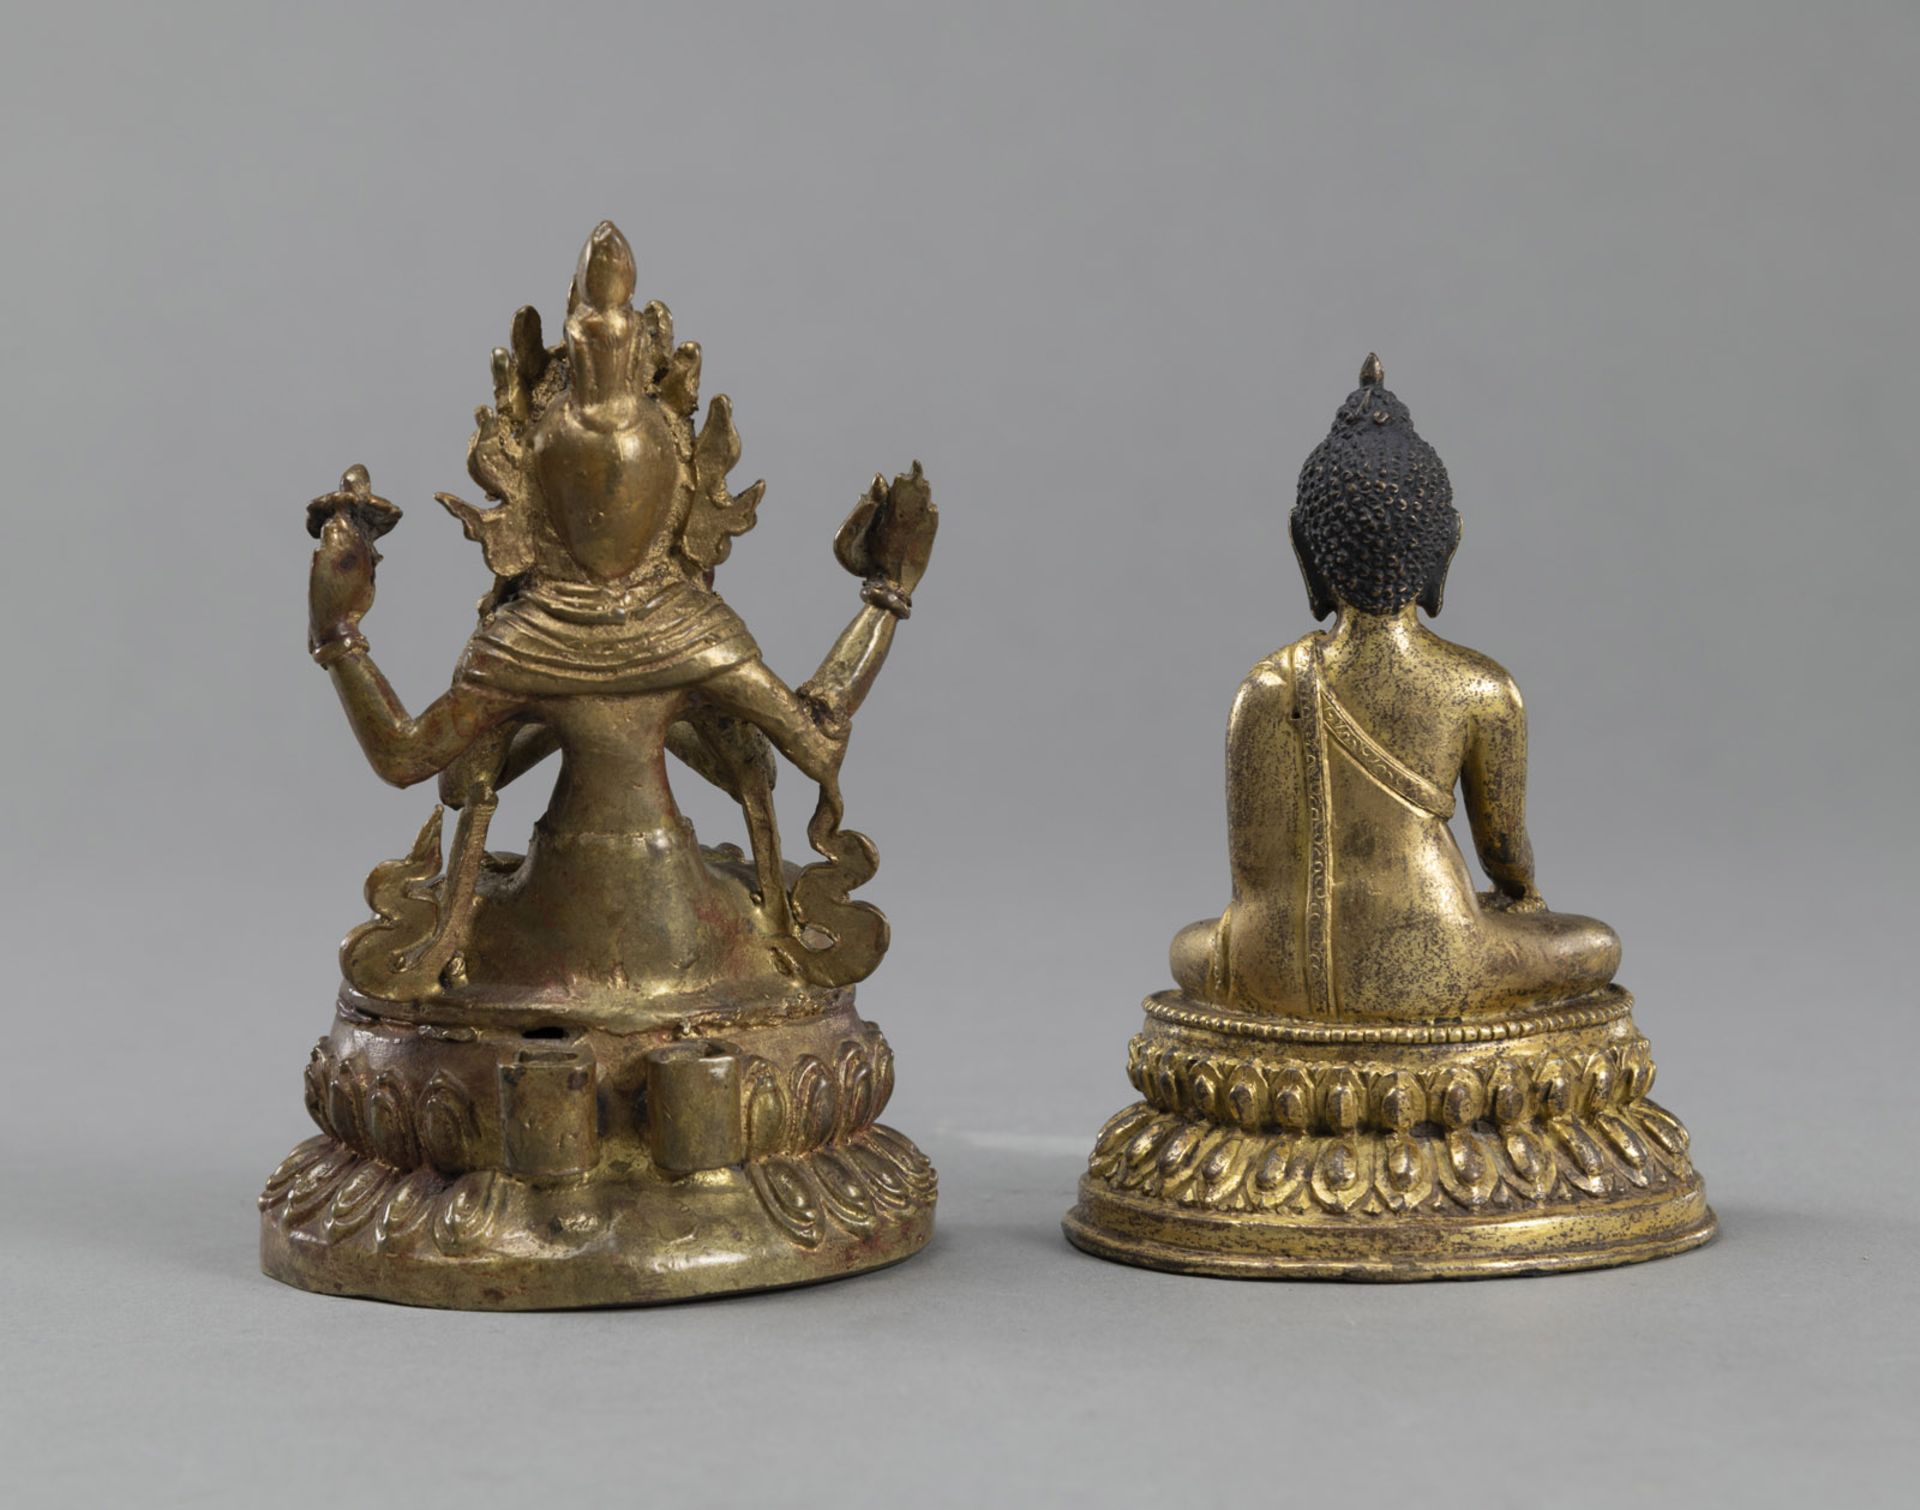 A GILT BRONZE SEATED BUDDHA SHAKYAMUNI AND A LACQUERED AND GILT BRONZE FIGURE OF FOUR-ARMED AVALOKI - Image 3 of 4